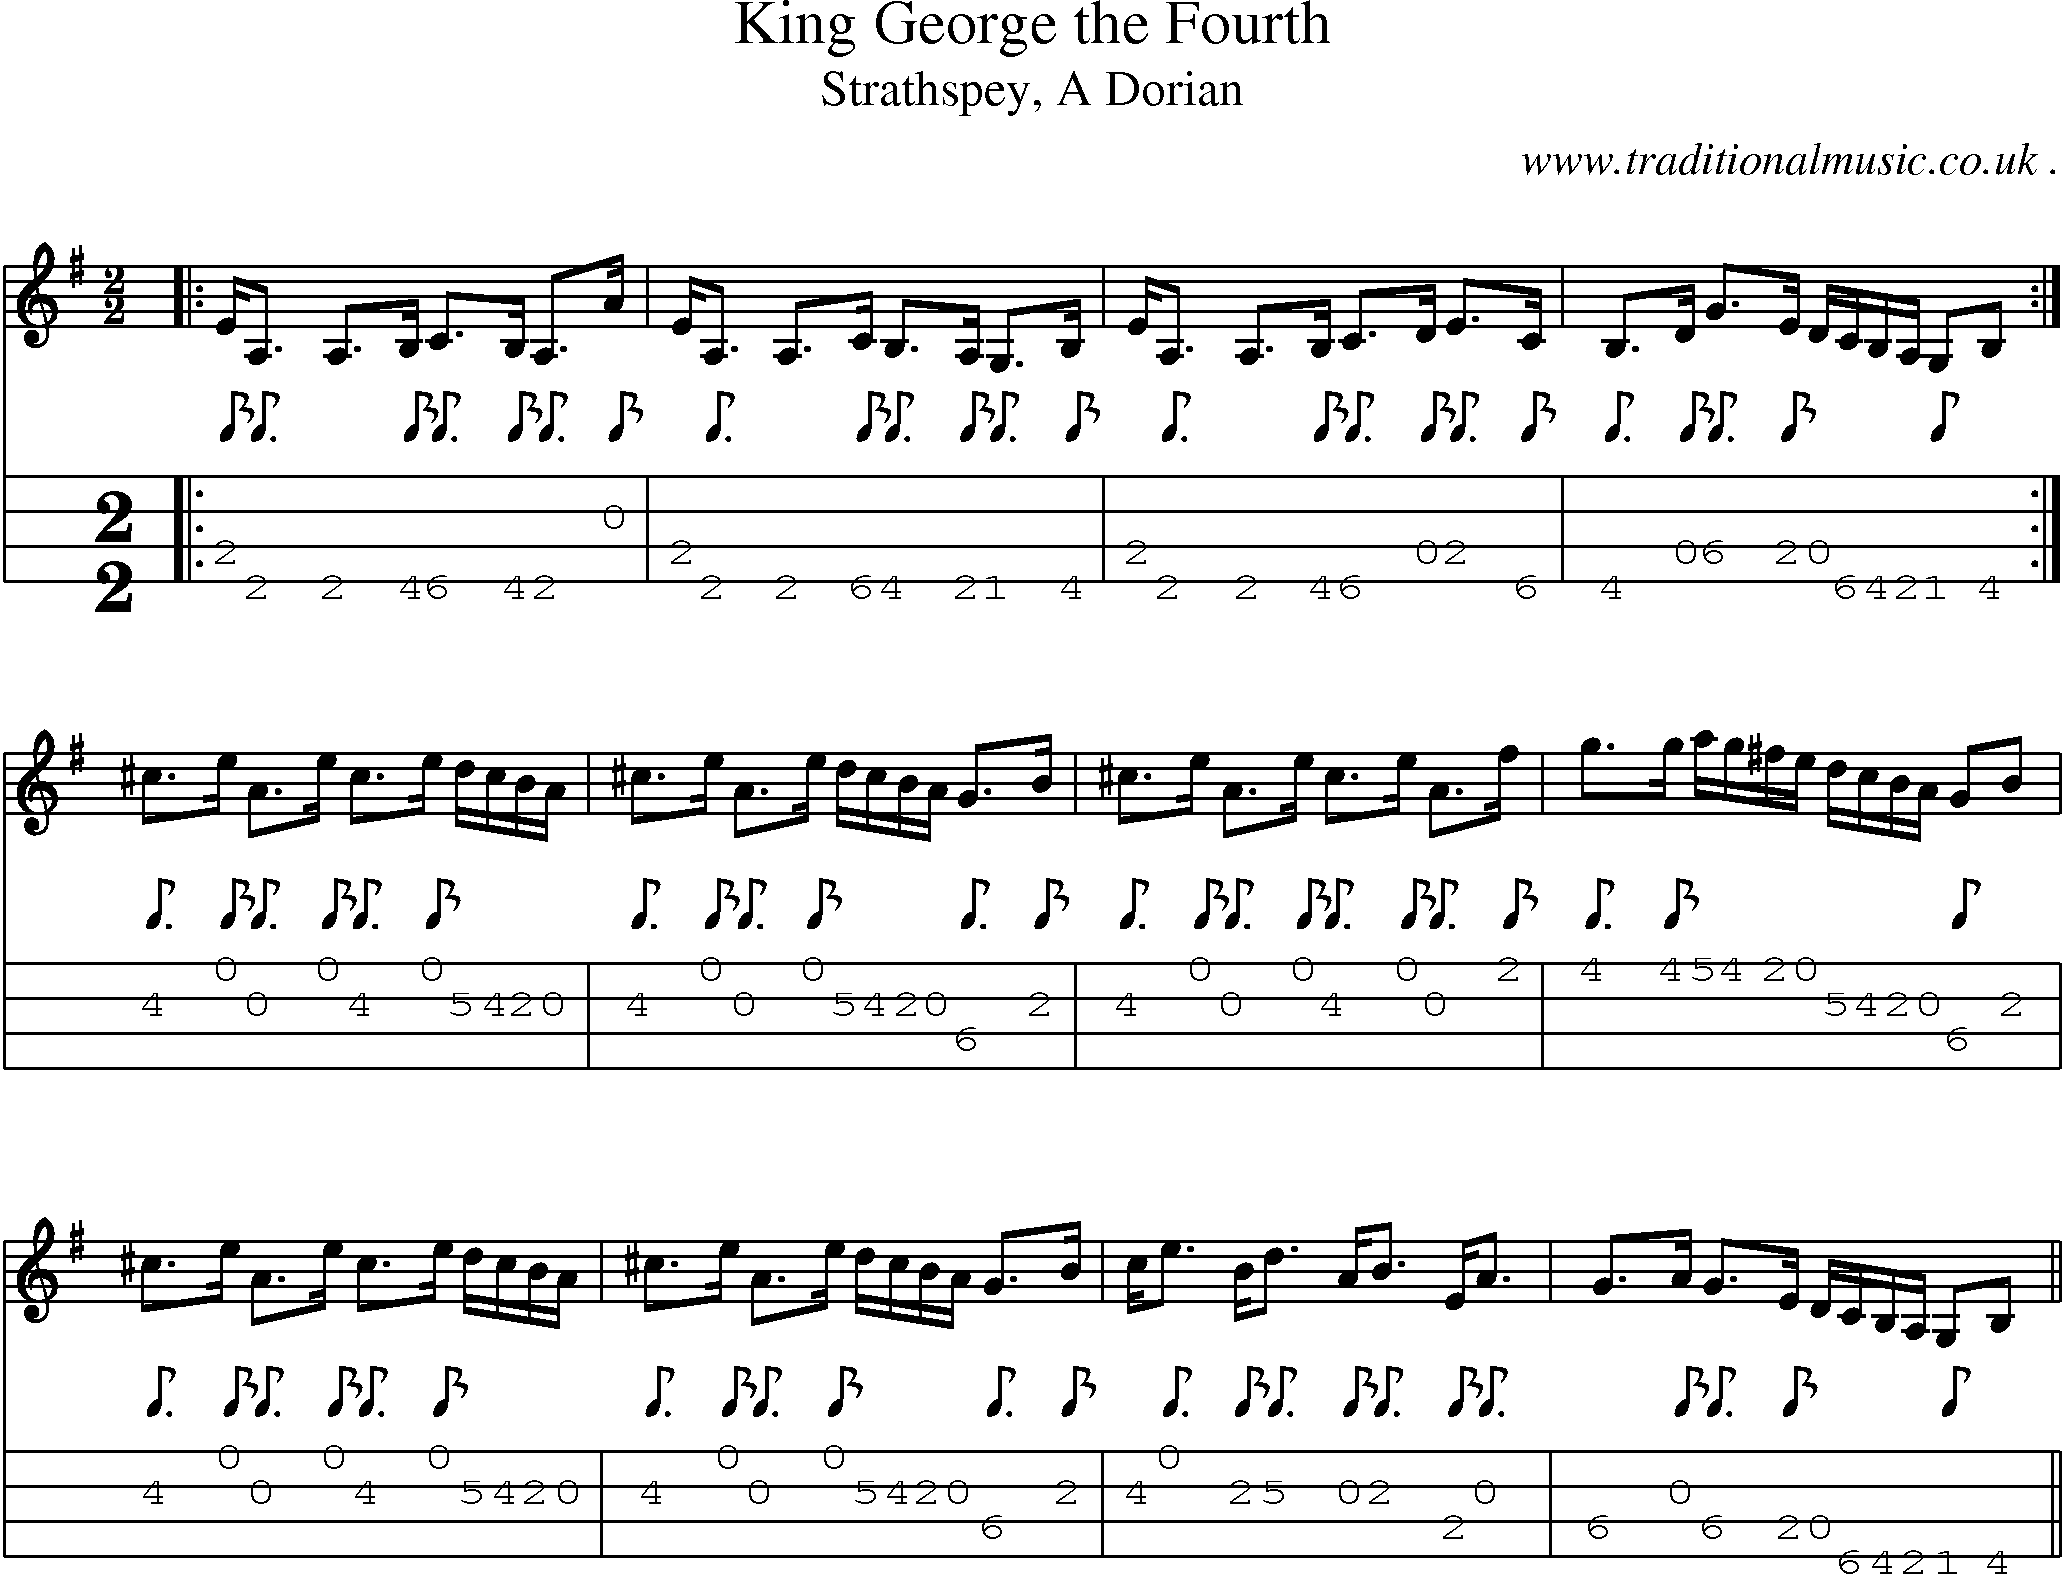 Sheet-music  score, Chords and Mandolin Tabs for King George The Fourth